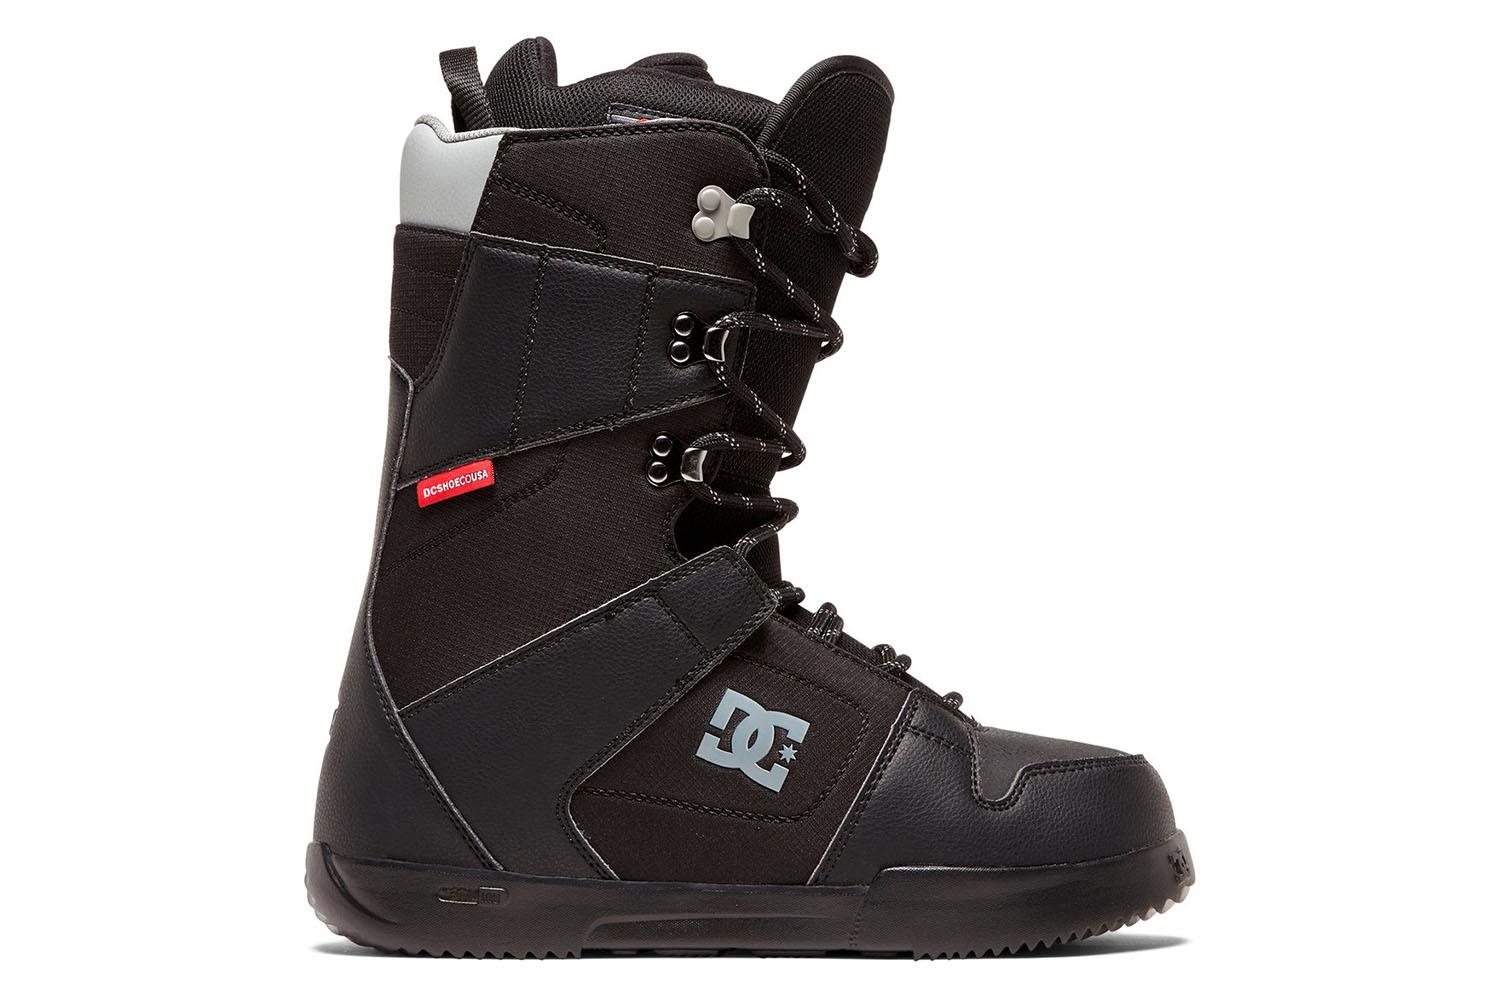 Our Top Deals on the Best Snowboarding Boots | Digital Trends